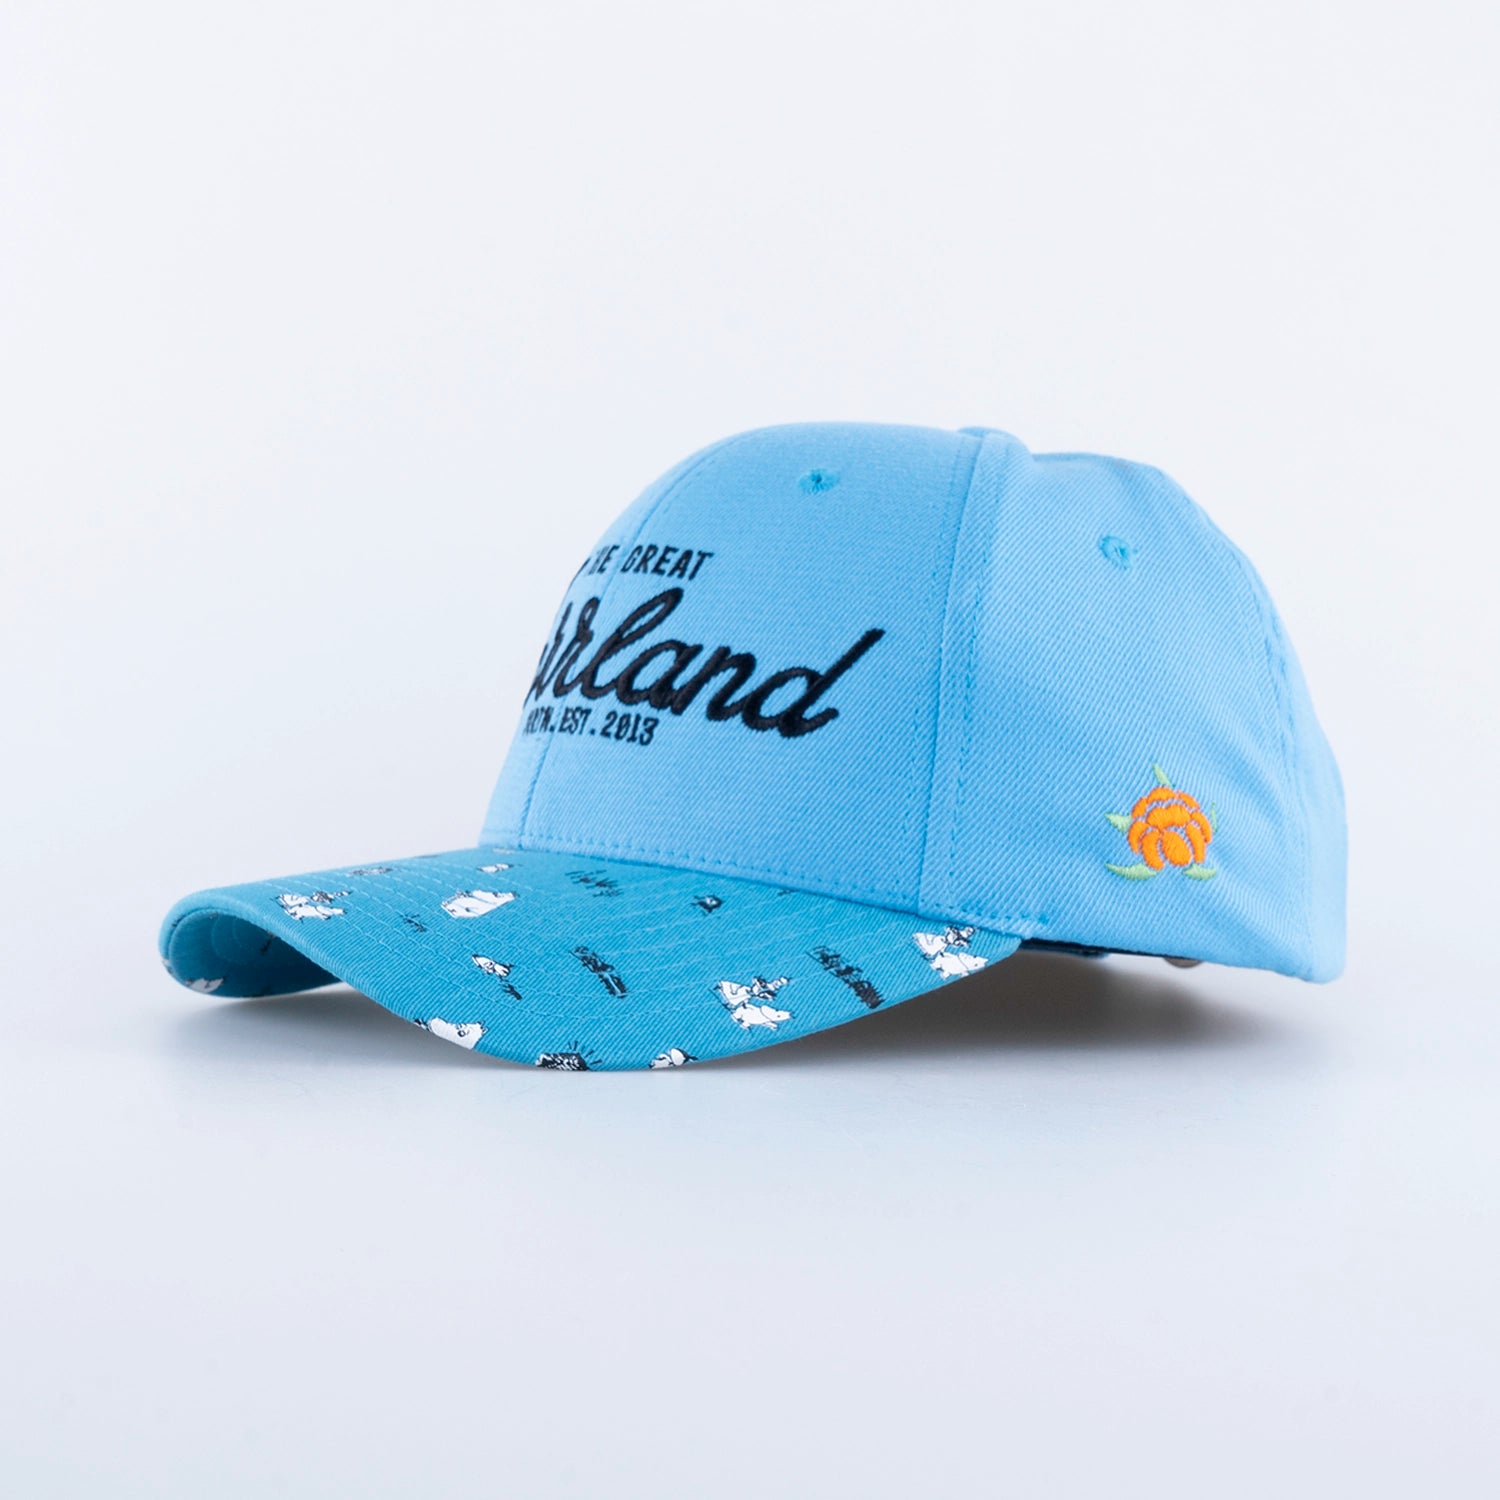 GREAT NORRLAND CAP - HOOKED MUMIN BLUE